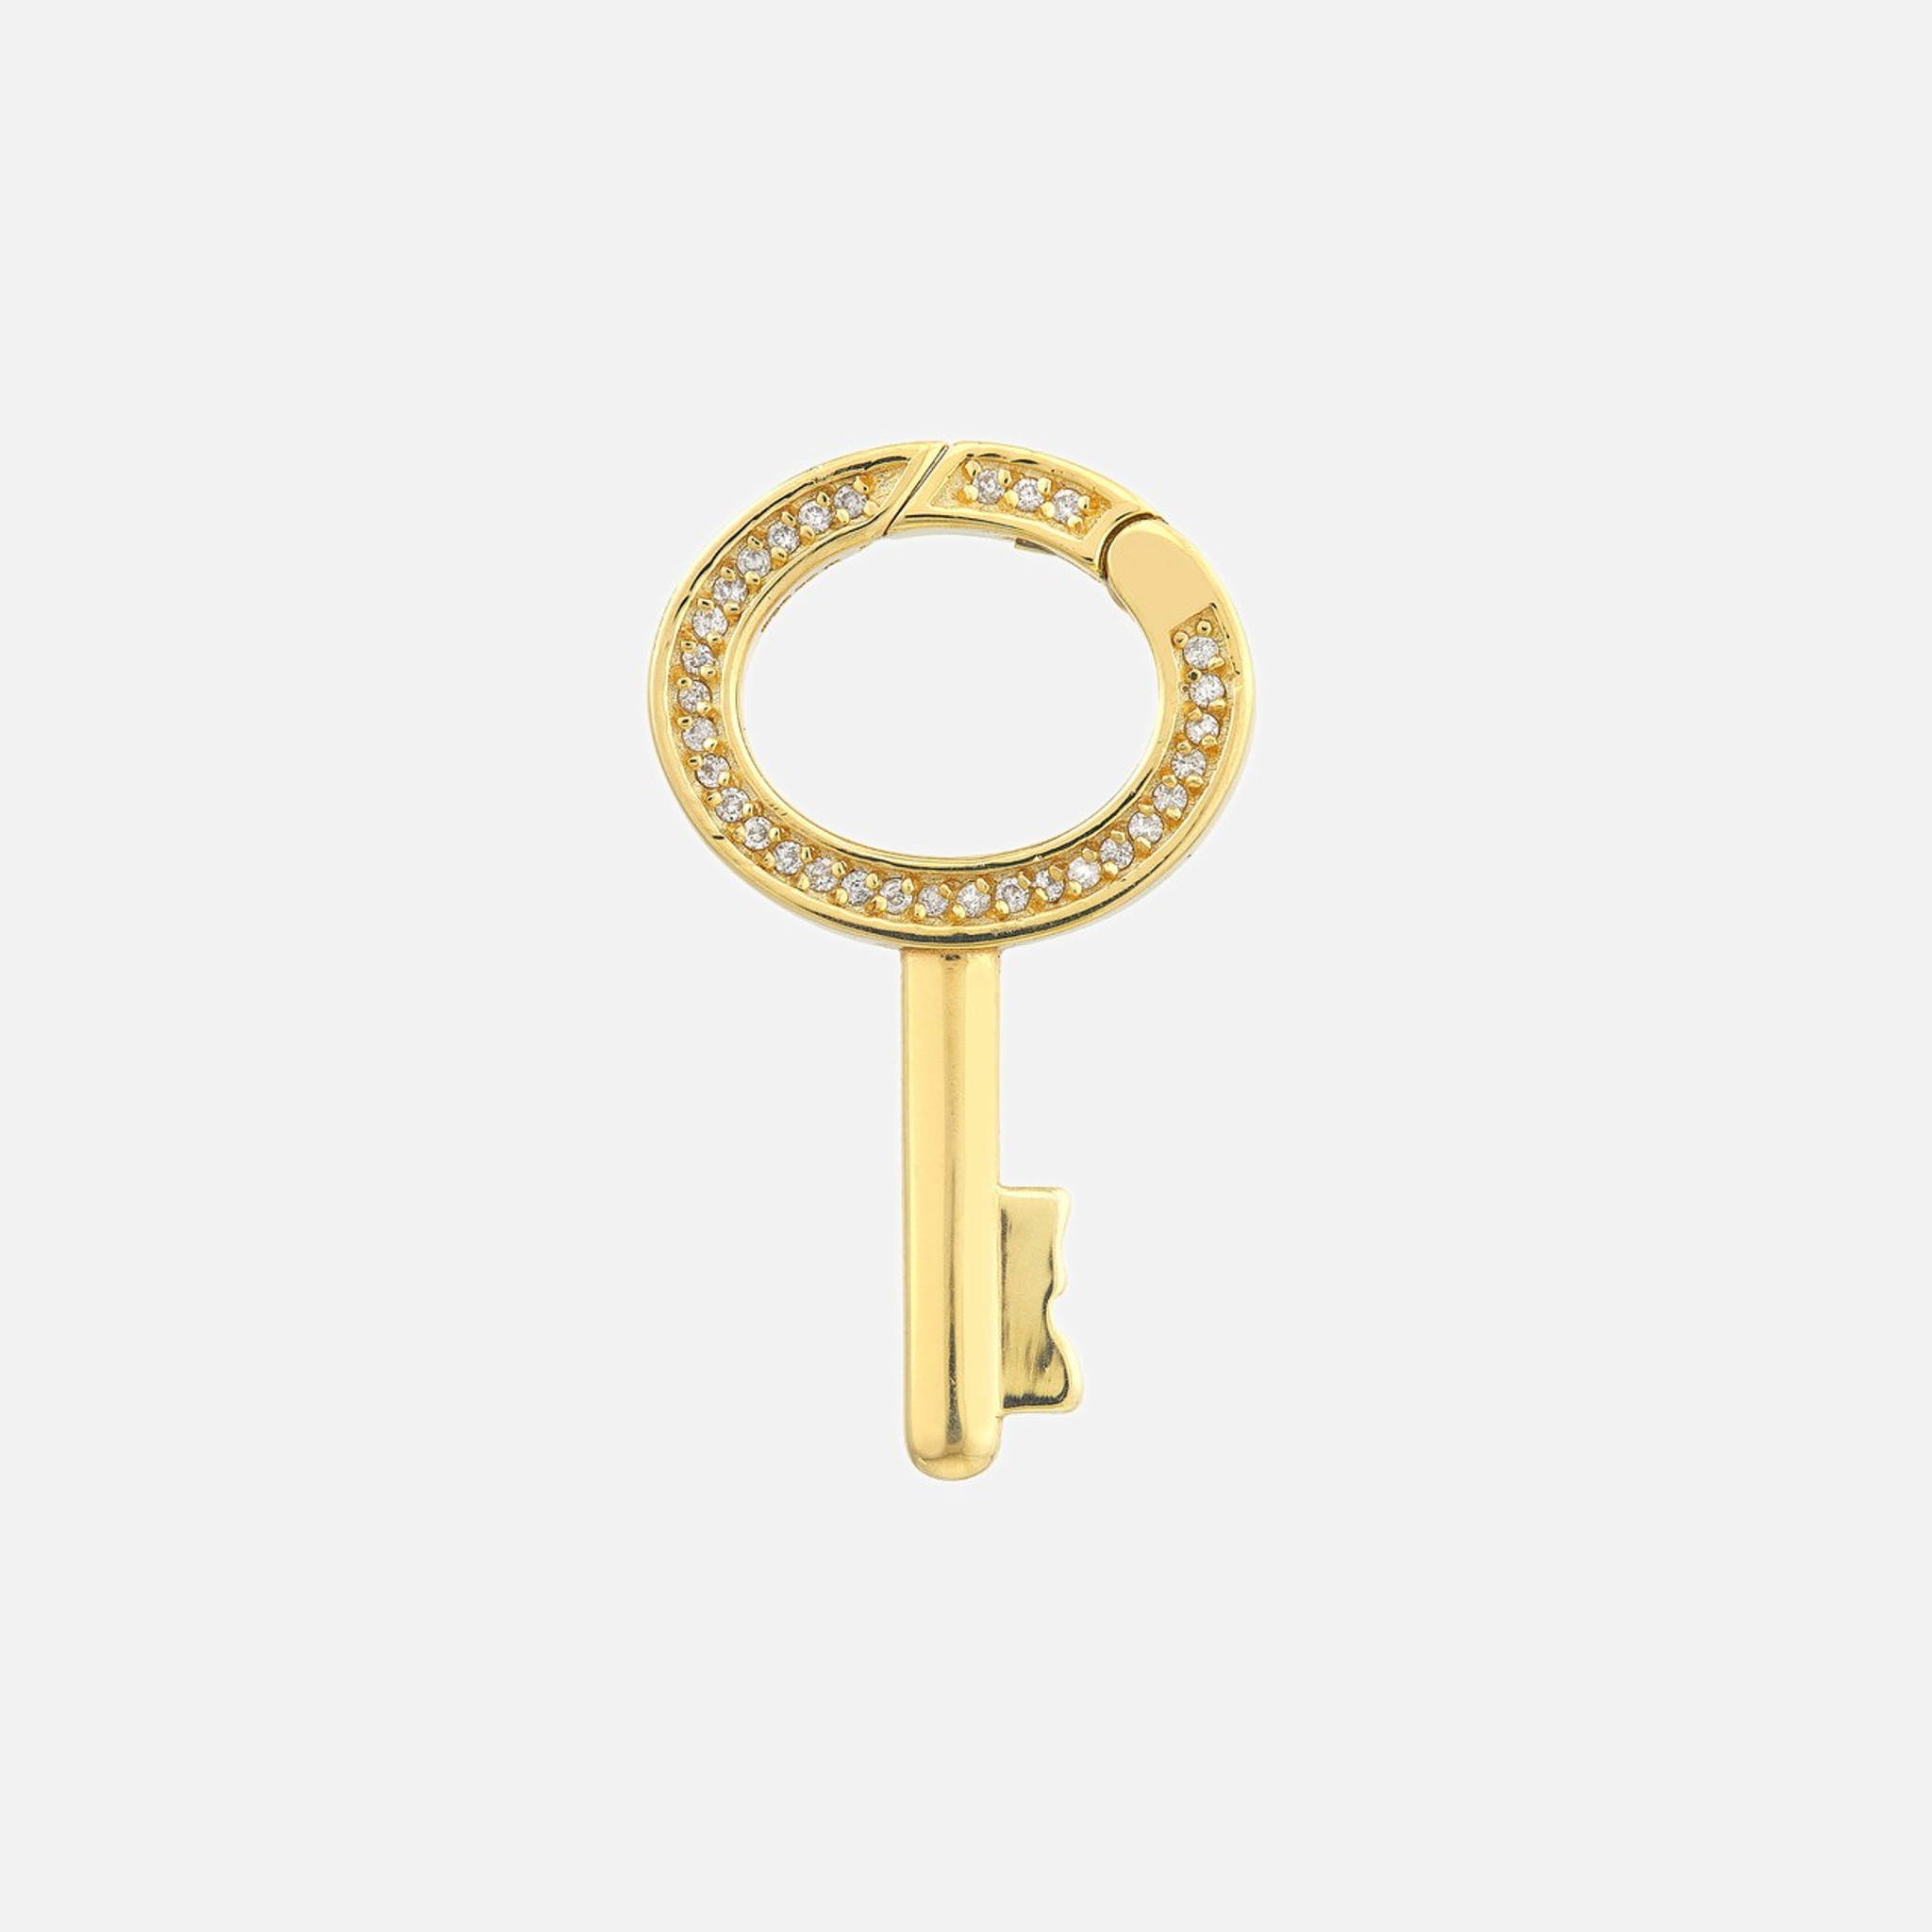 Our diamond key pendant debuts in glistening 14k yellow gold. Its oval silhouette is trimmed with dainty 0.17 CTW white diamonds.